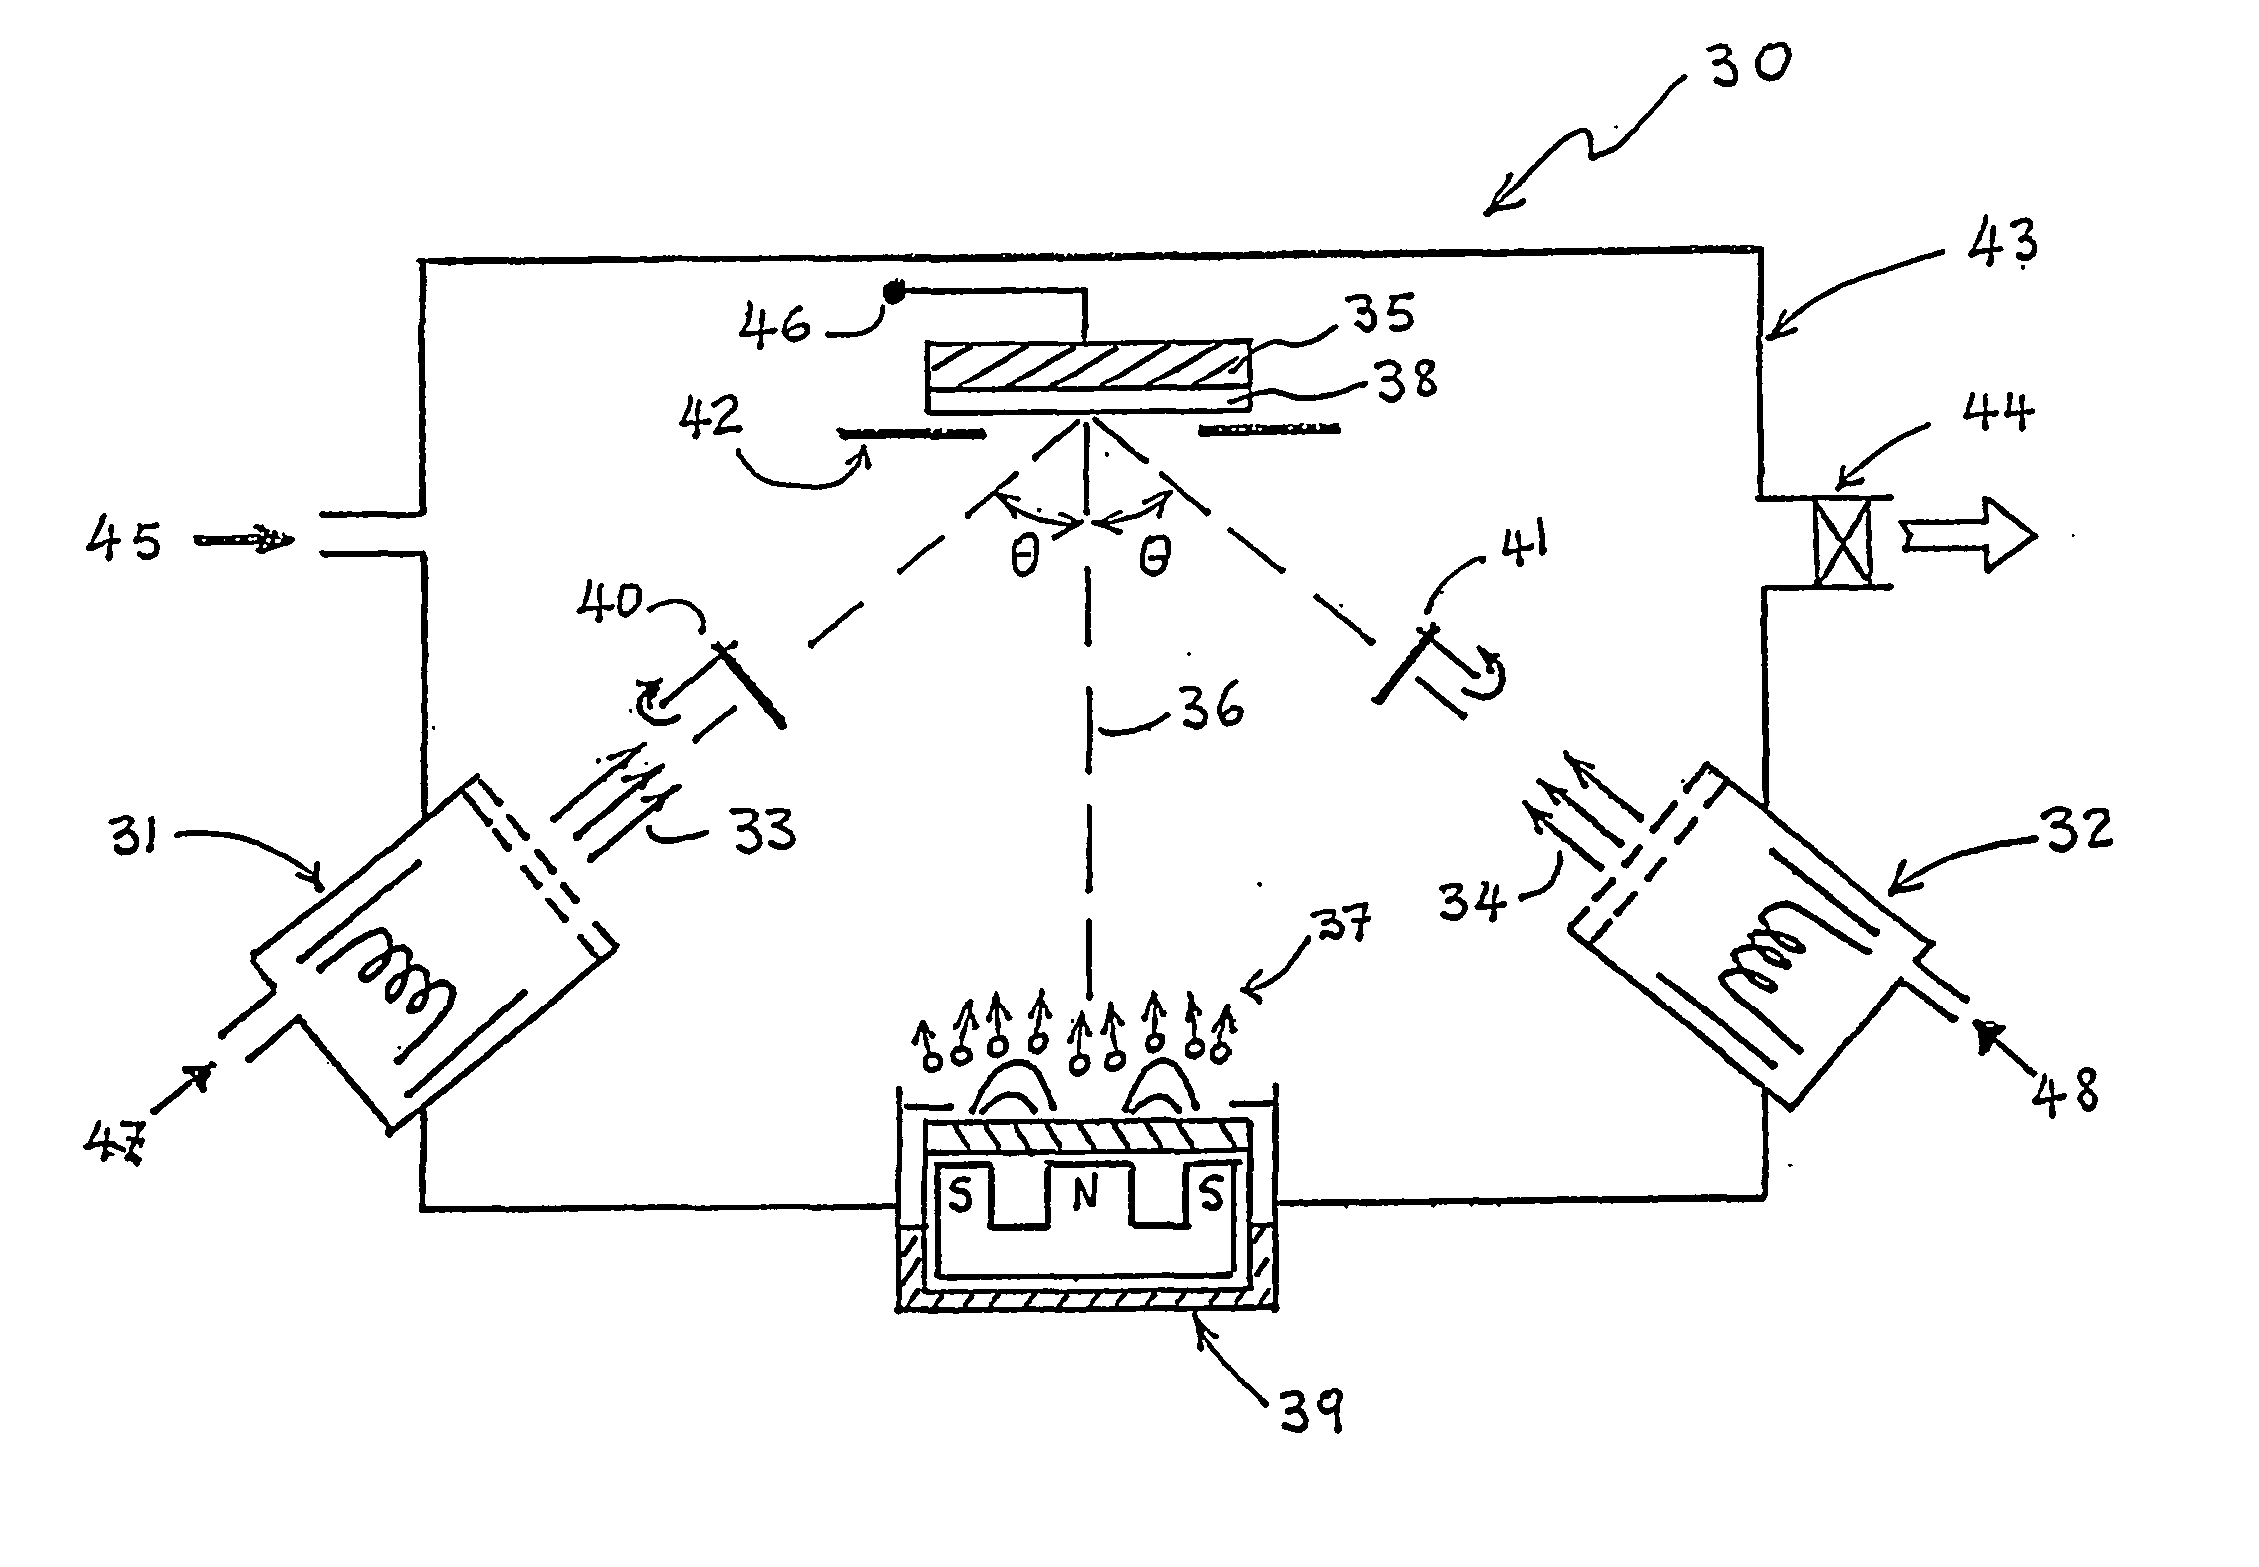 Process and apparatus for producing cystalline thin film buffer layers and structures having biaxial texture